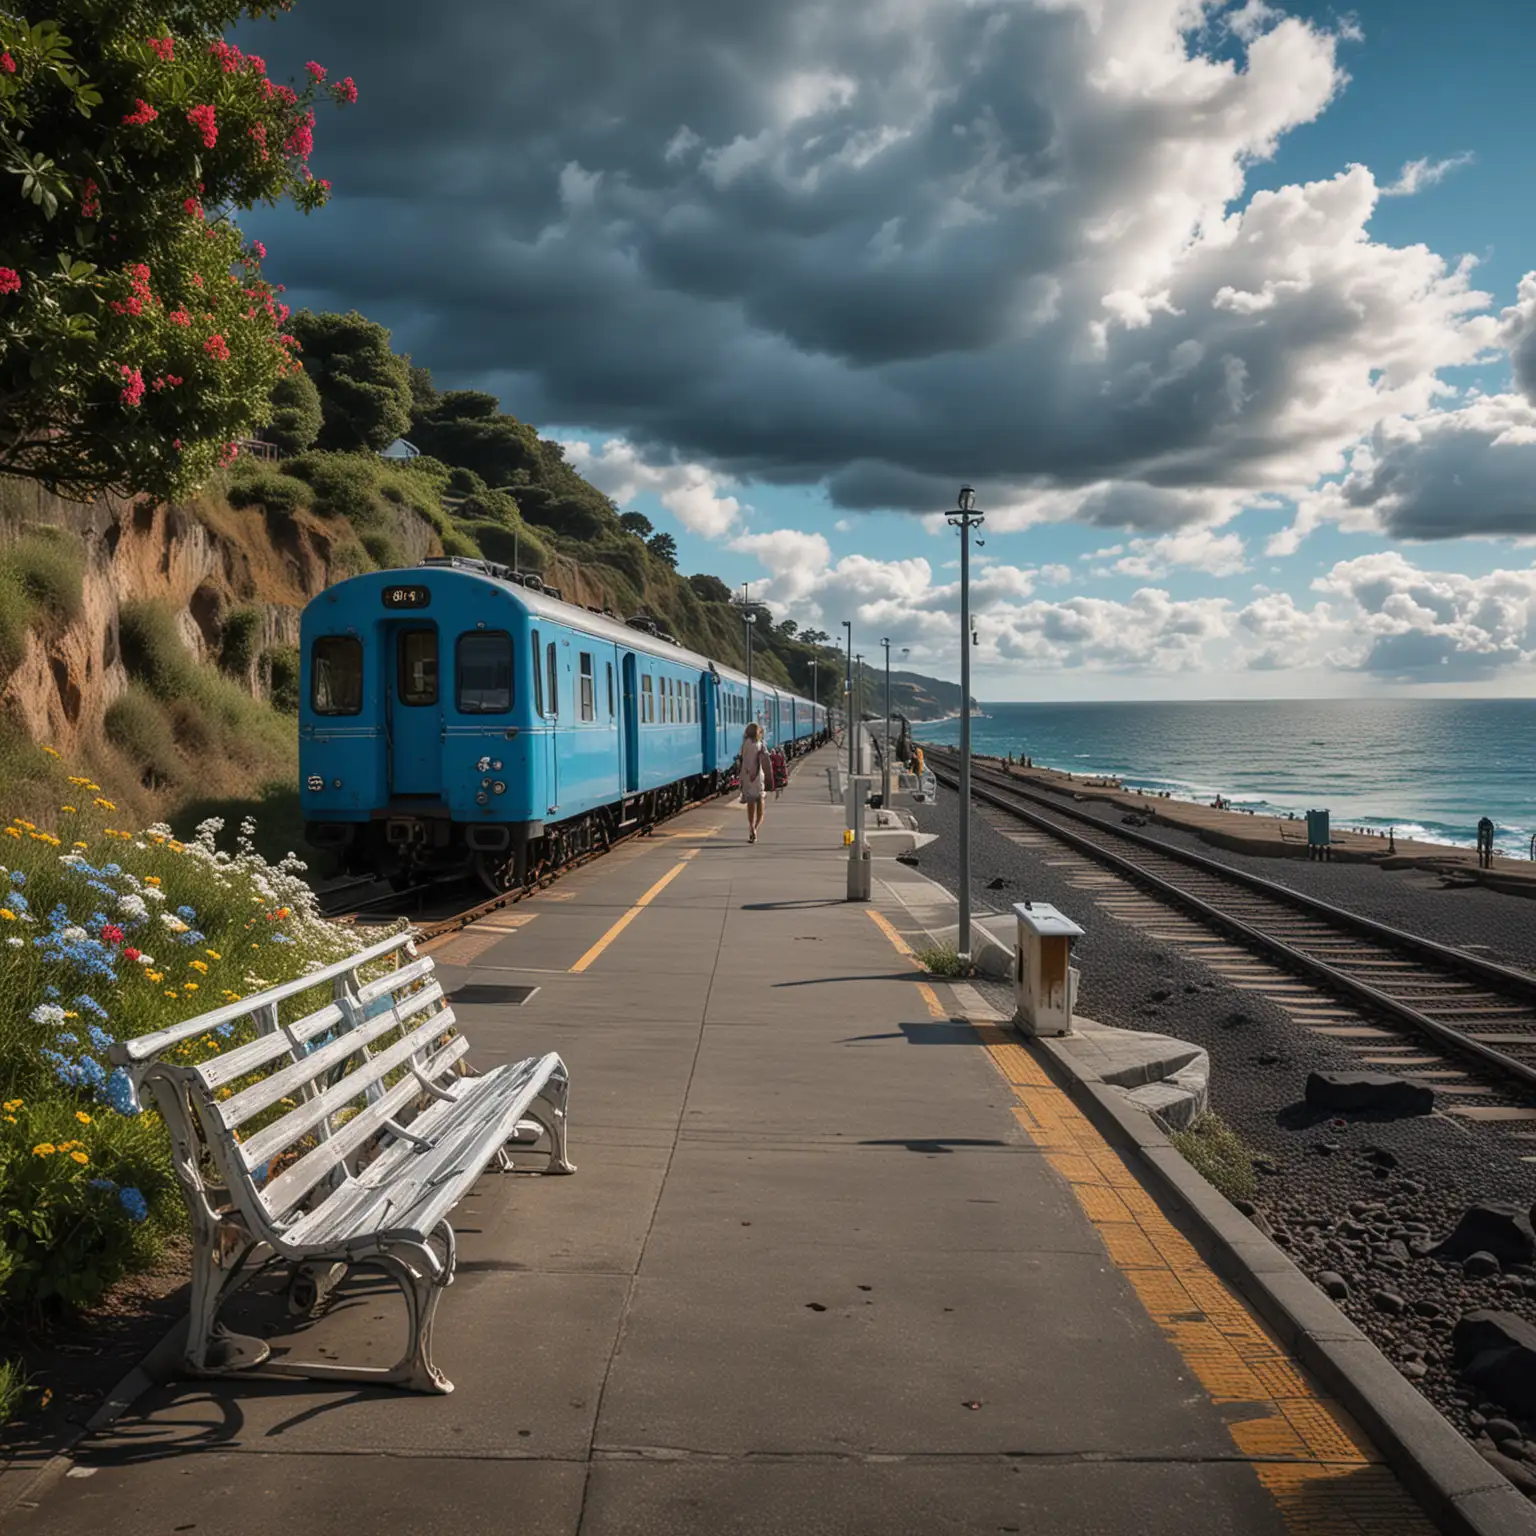 Solitary-Woman-Waiting-at-Cliffside-Train-Station-Overlooking-Blue-Ocean